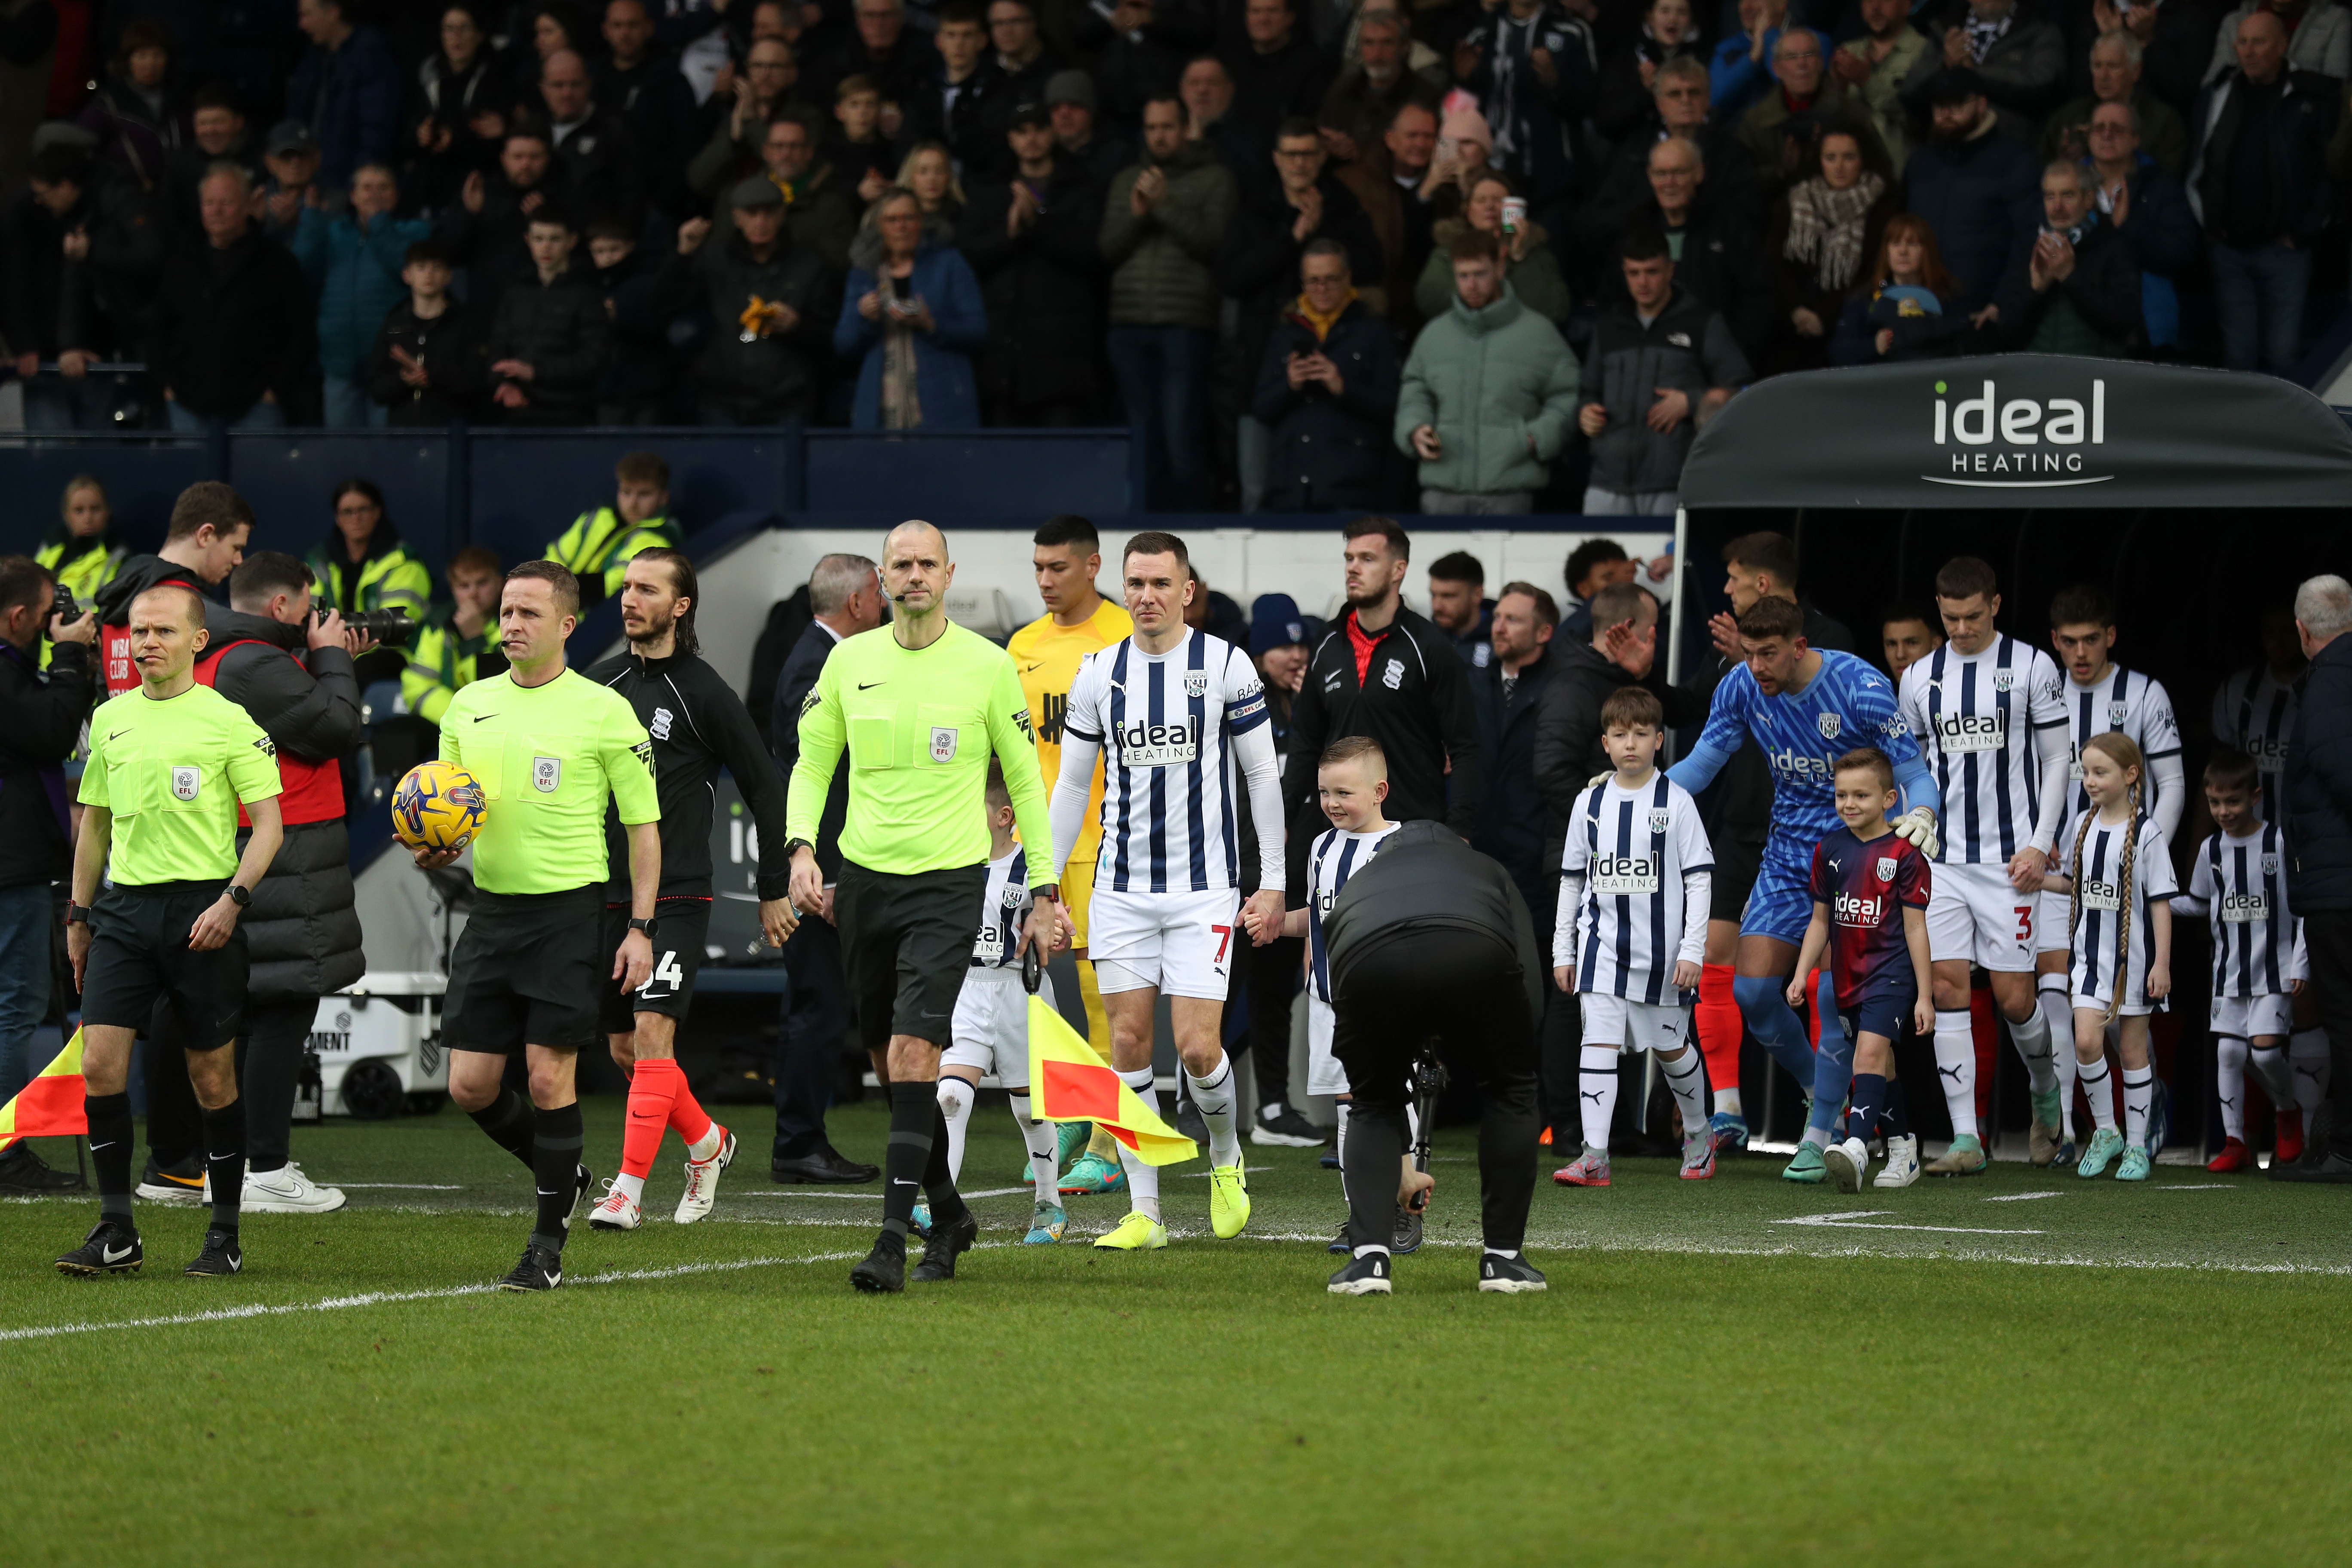 Albion players walk out of the tunnel ahead of kick-off at The Hawthorns